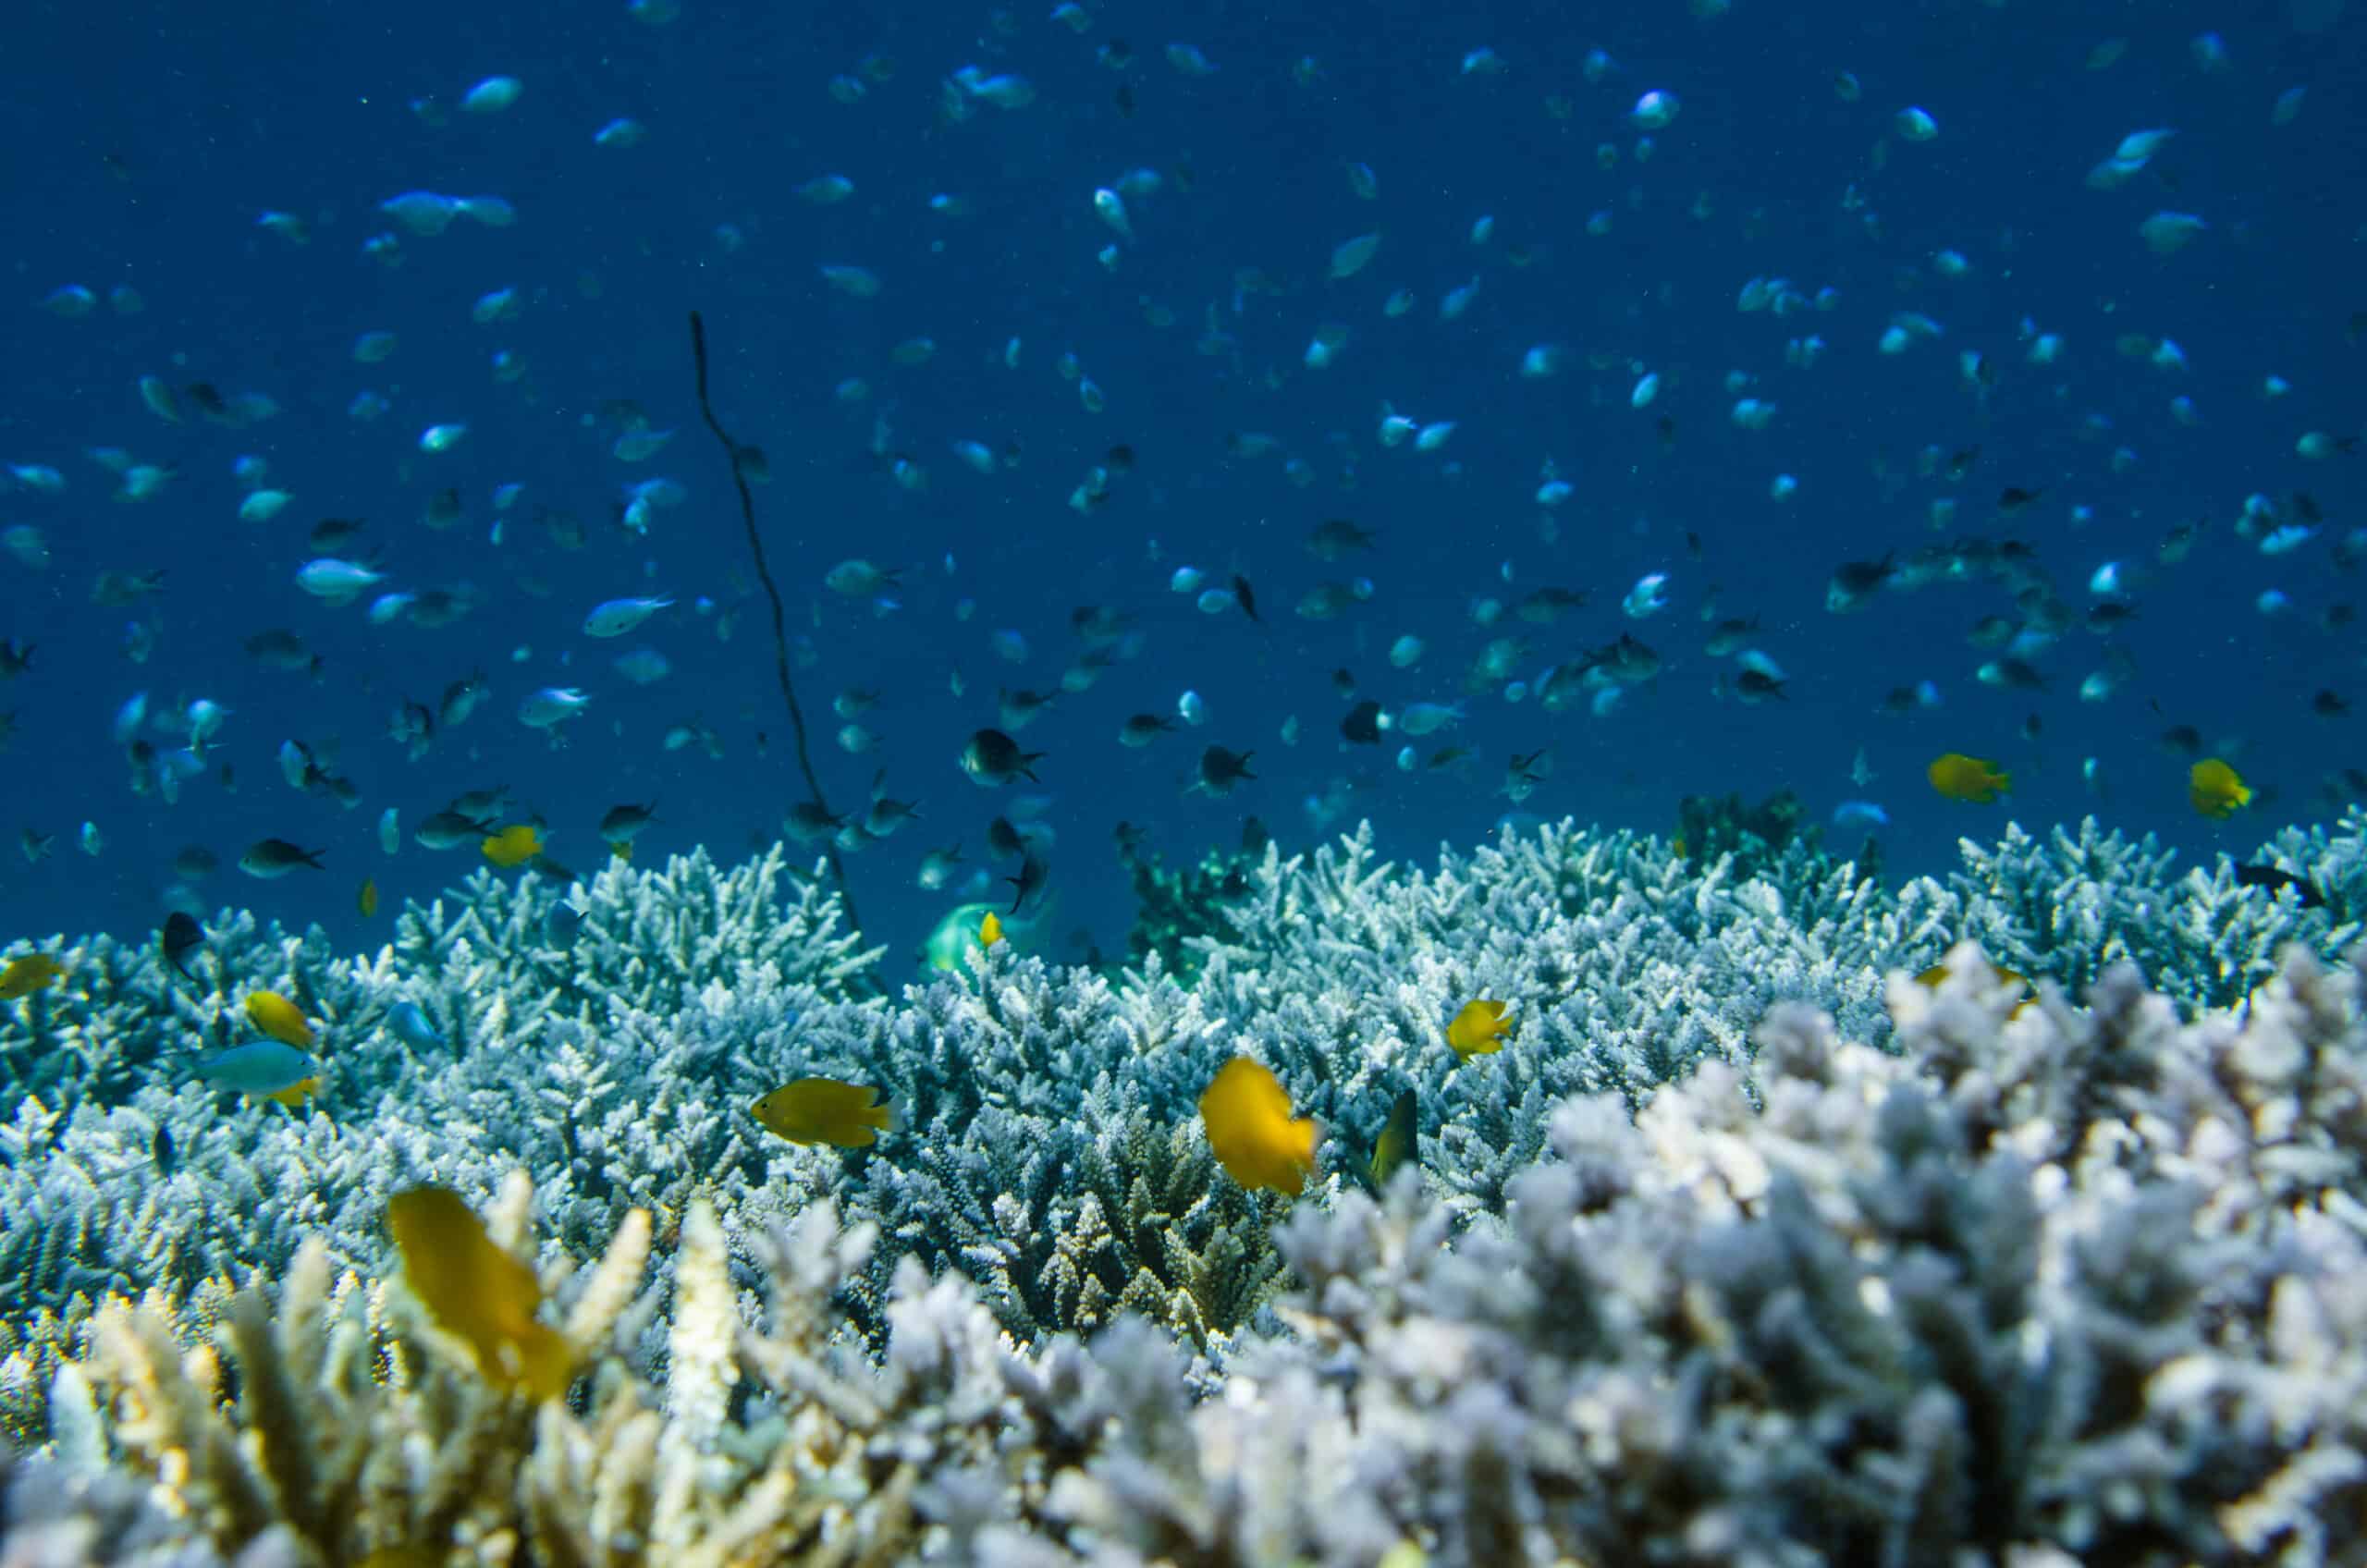 How One Company Is Restoring Coral To Combat Climate Change's Coastal Impact